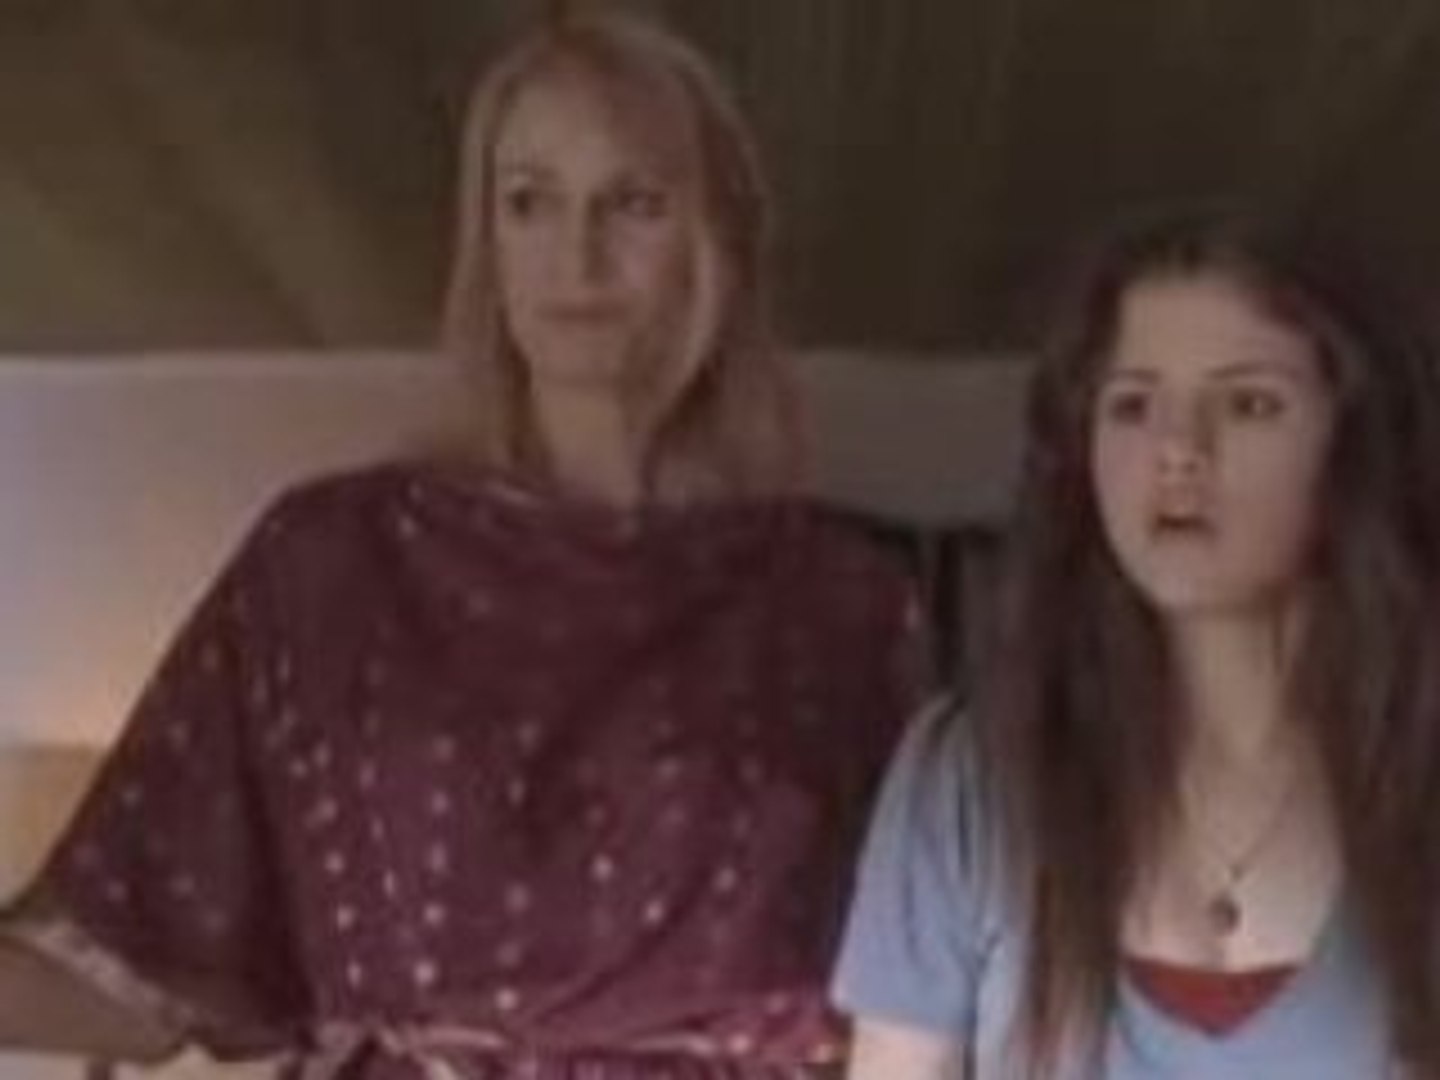 Jane Lynch and baby Selena Gomez in Another Cinderella Story (2008) :  r/OnlyMurdersHulu